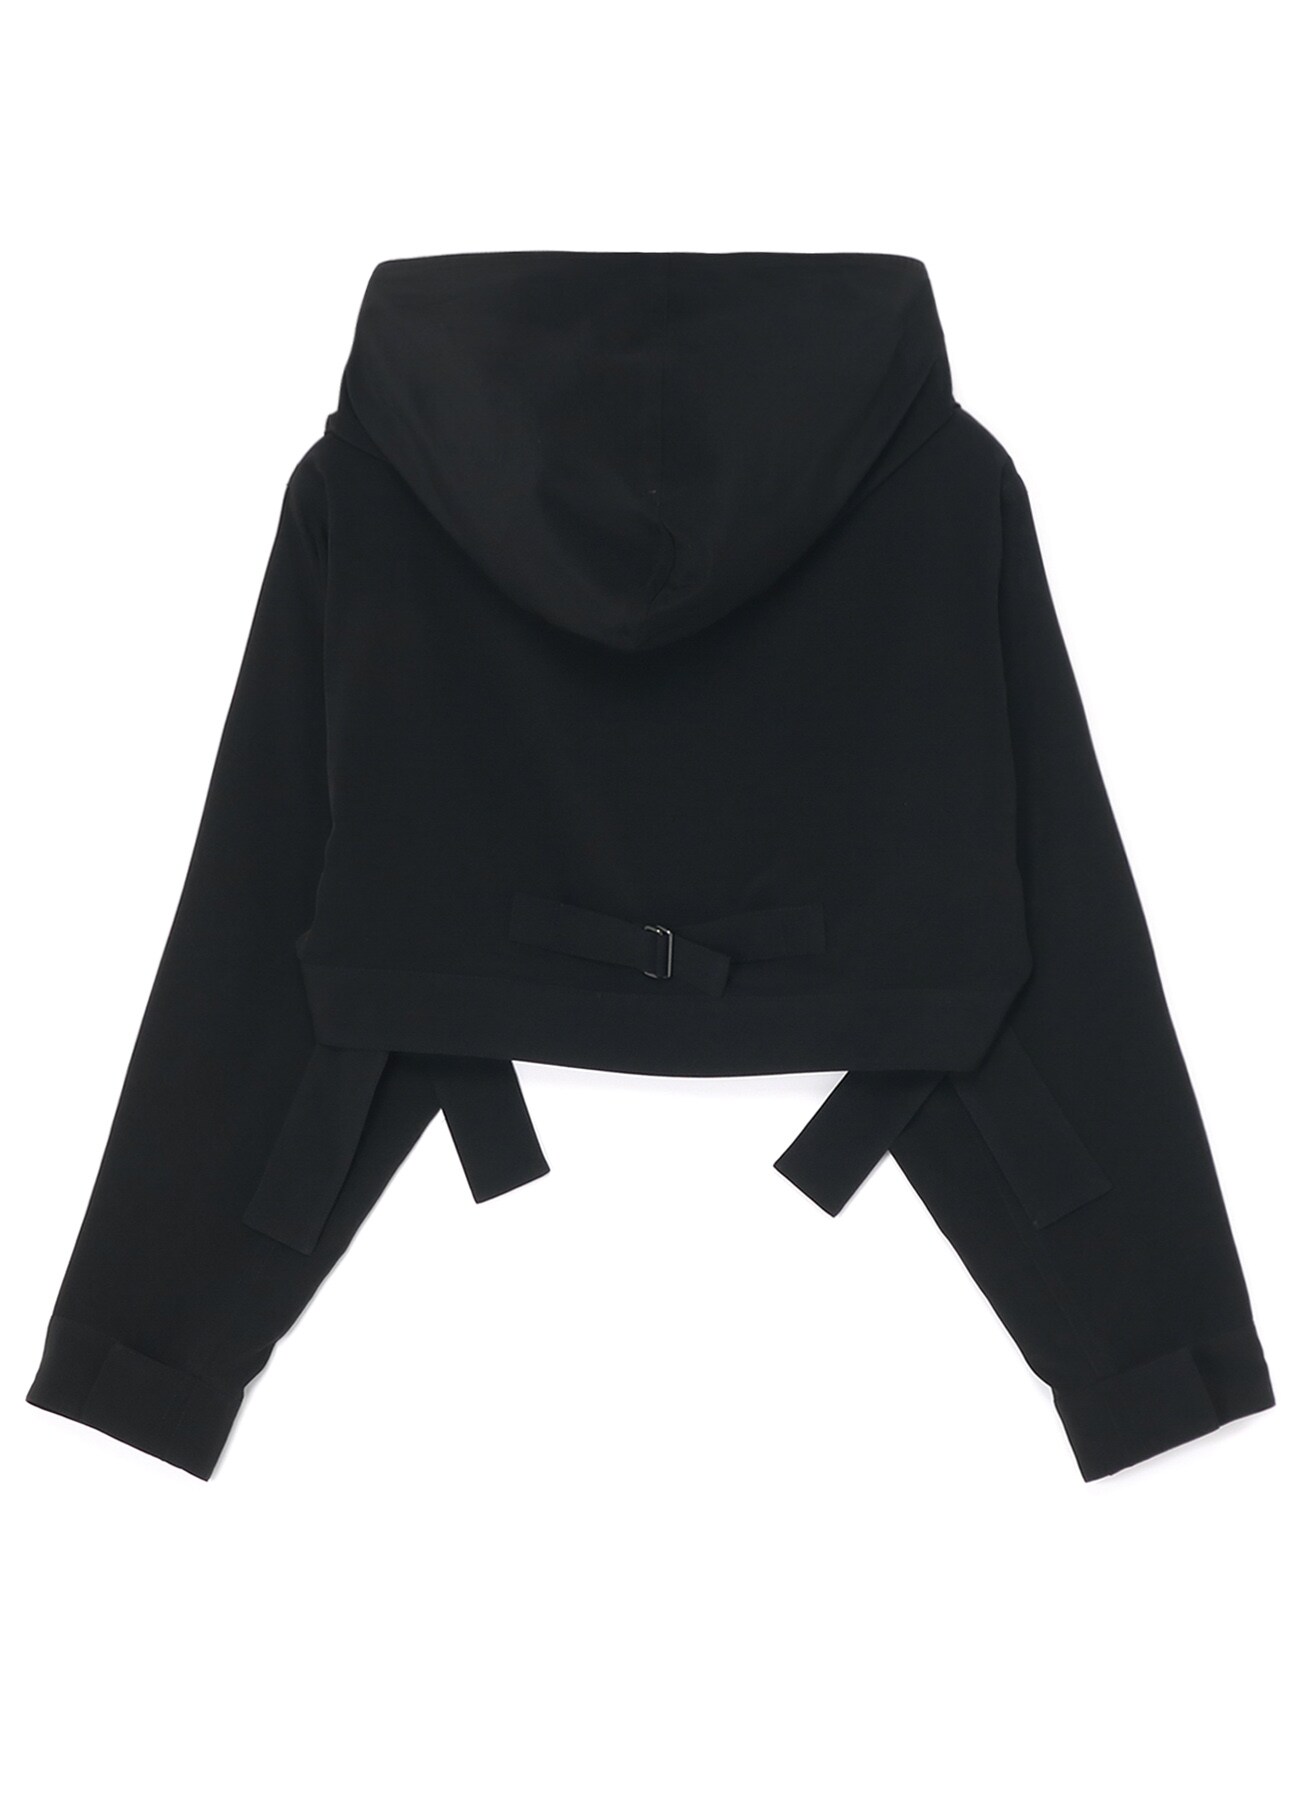 TRIACETATE/POLYESTER DE CHINE HOODED SHORT JACKET